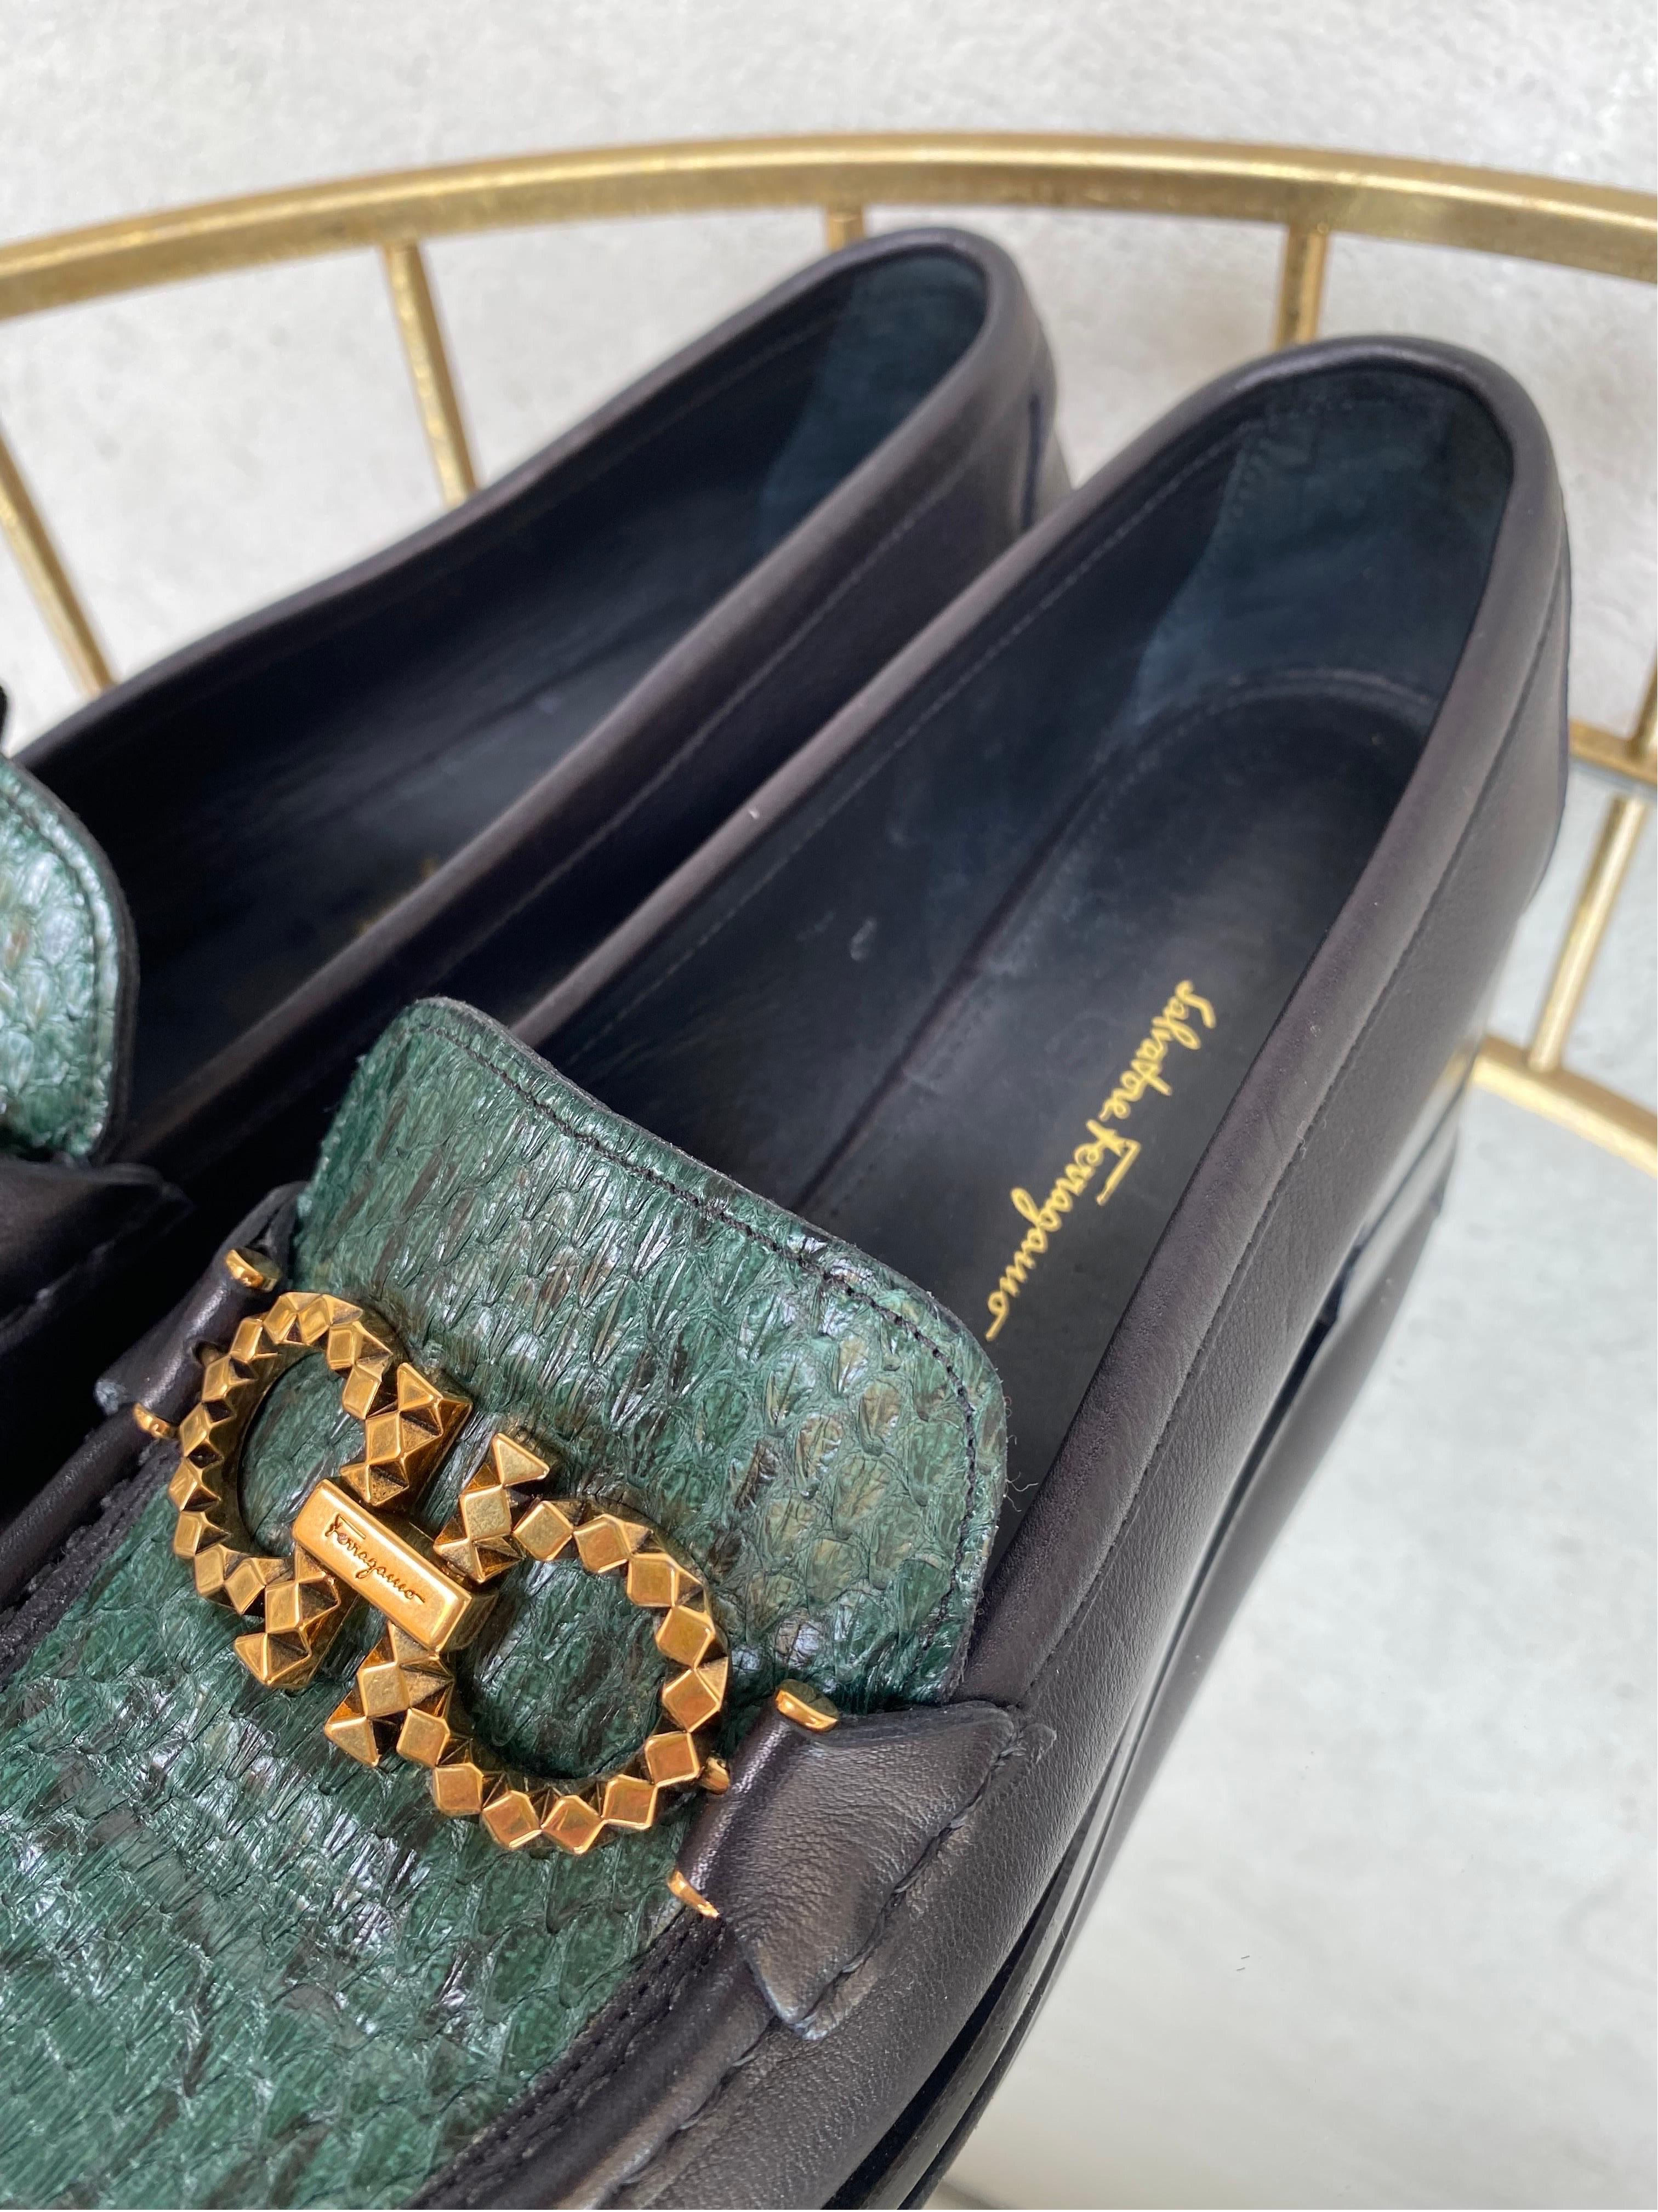 Salvatore Ferragamo loafers  In Excellent Condition For Sale In Carnate, IT